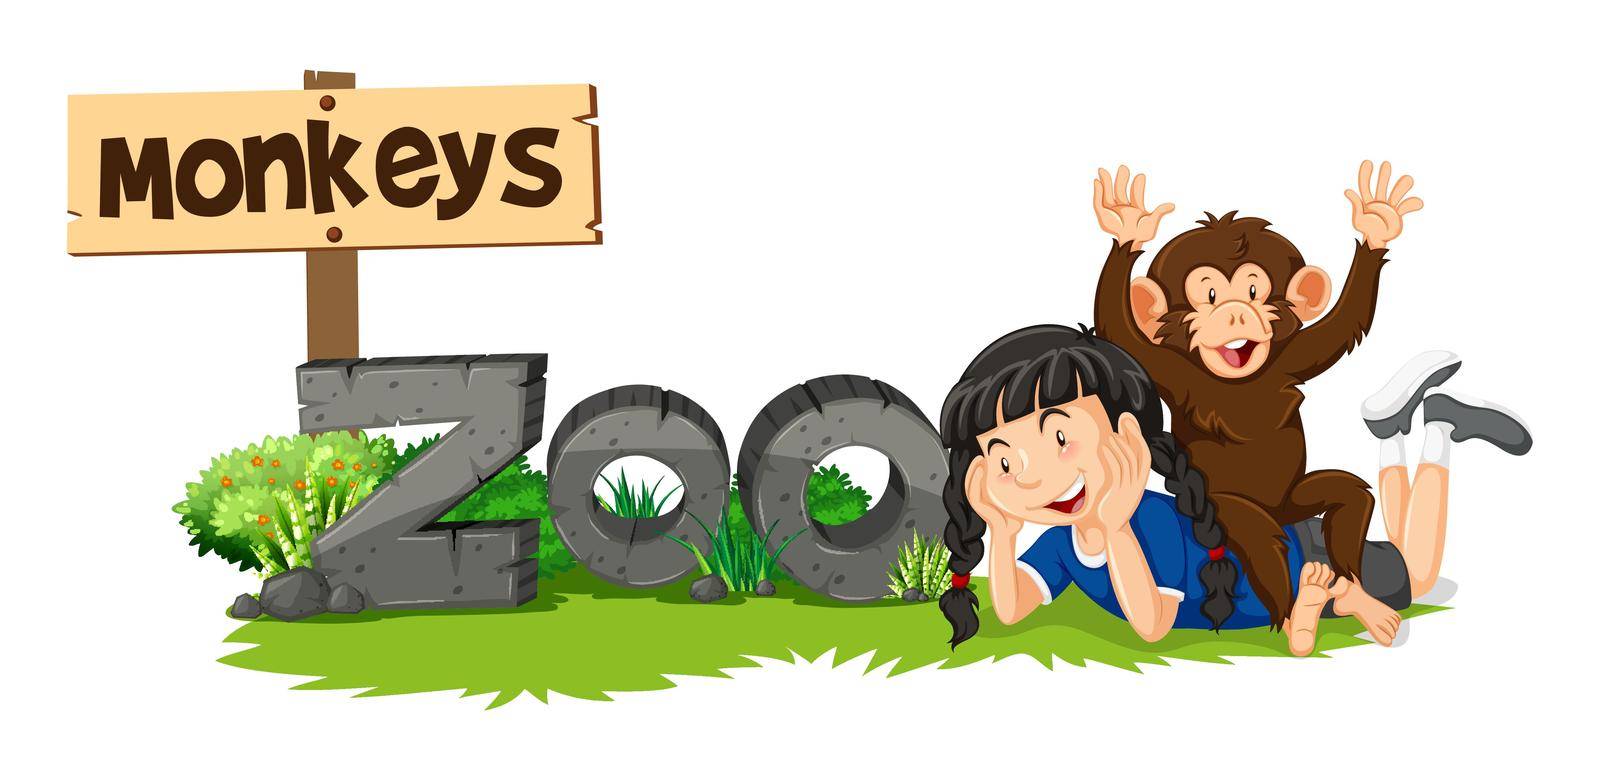 Monkey and girl by the zoo sign illustration